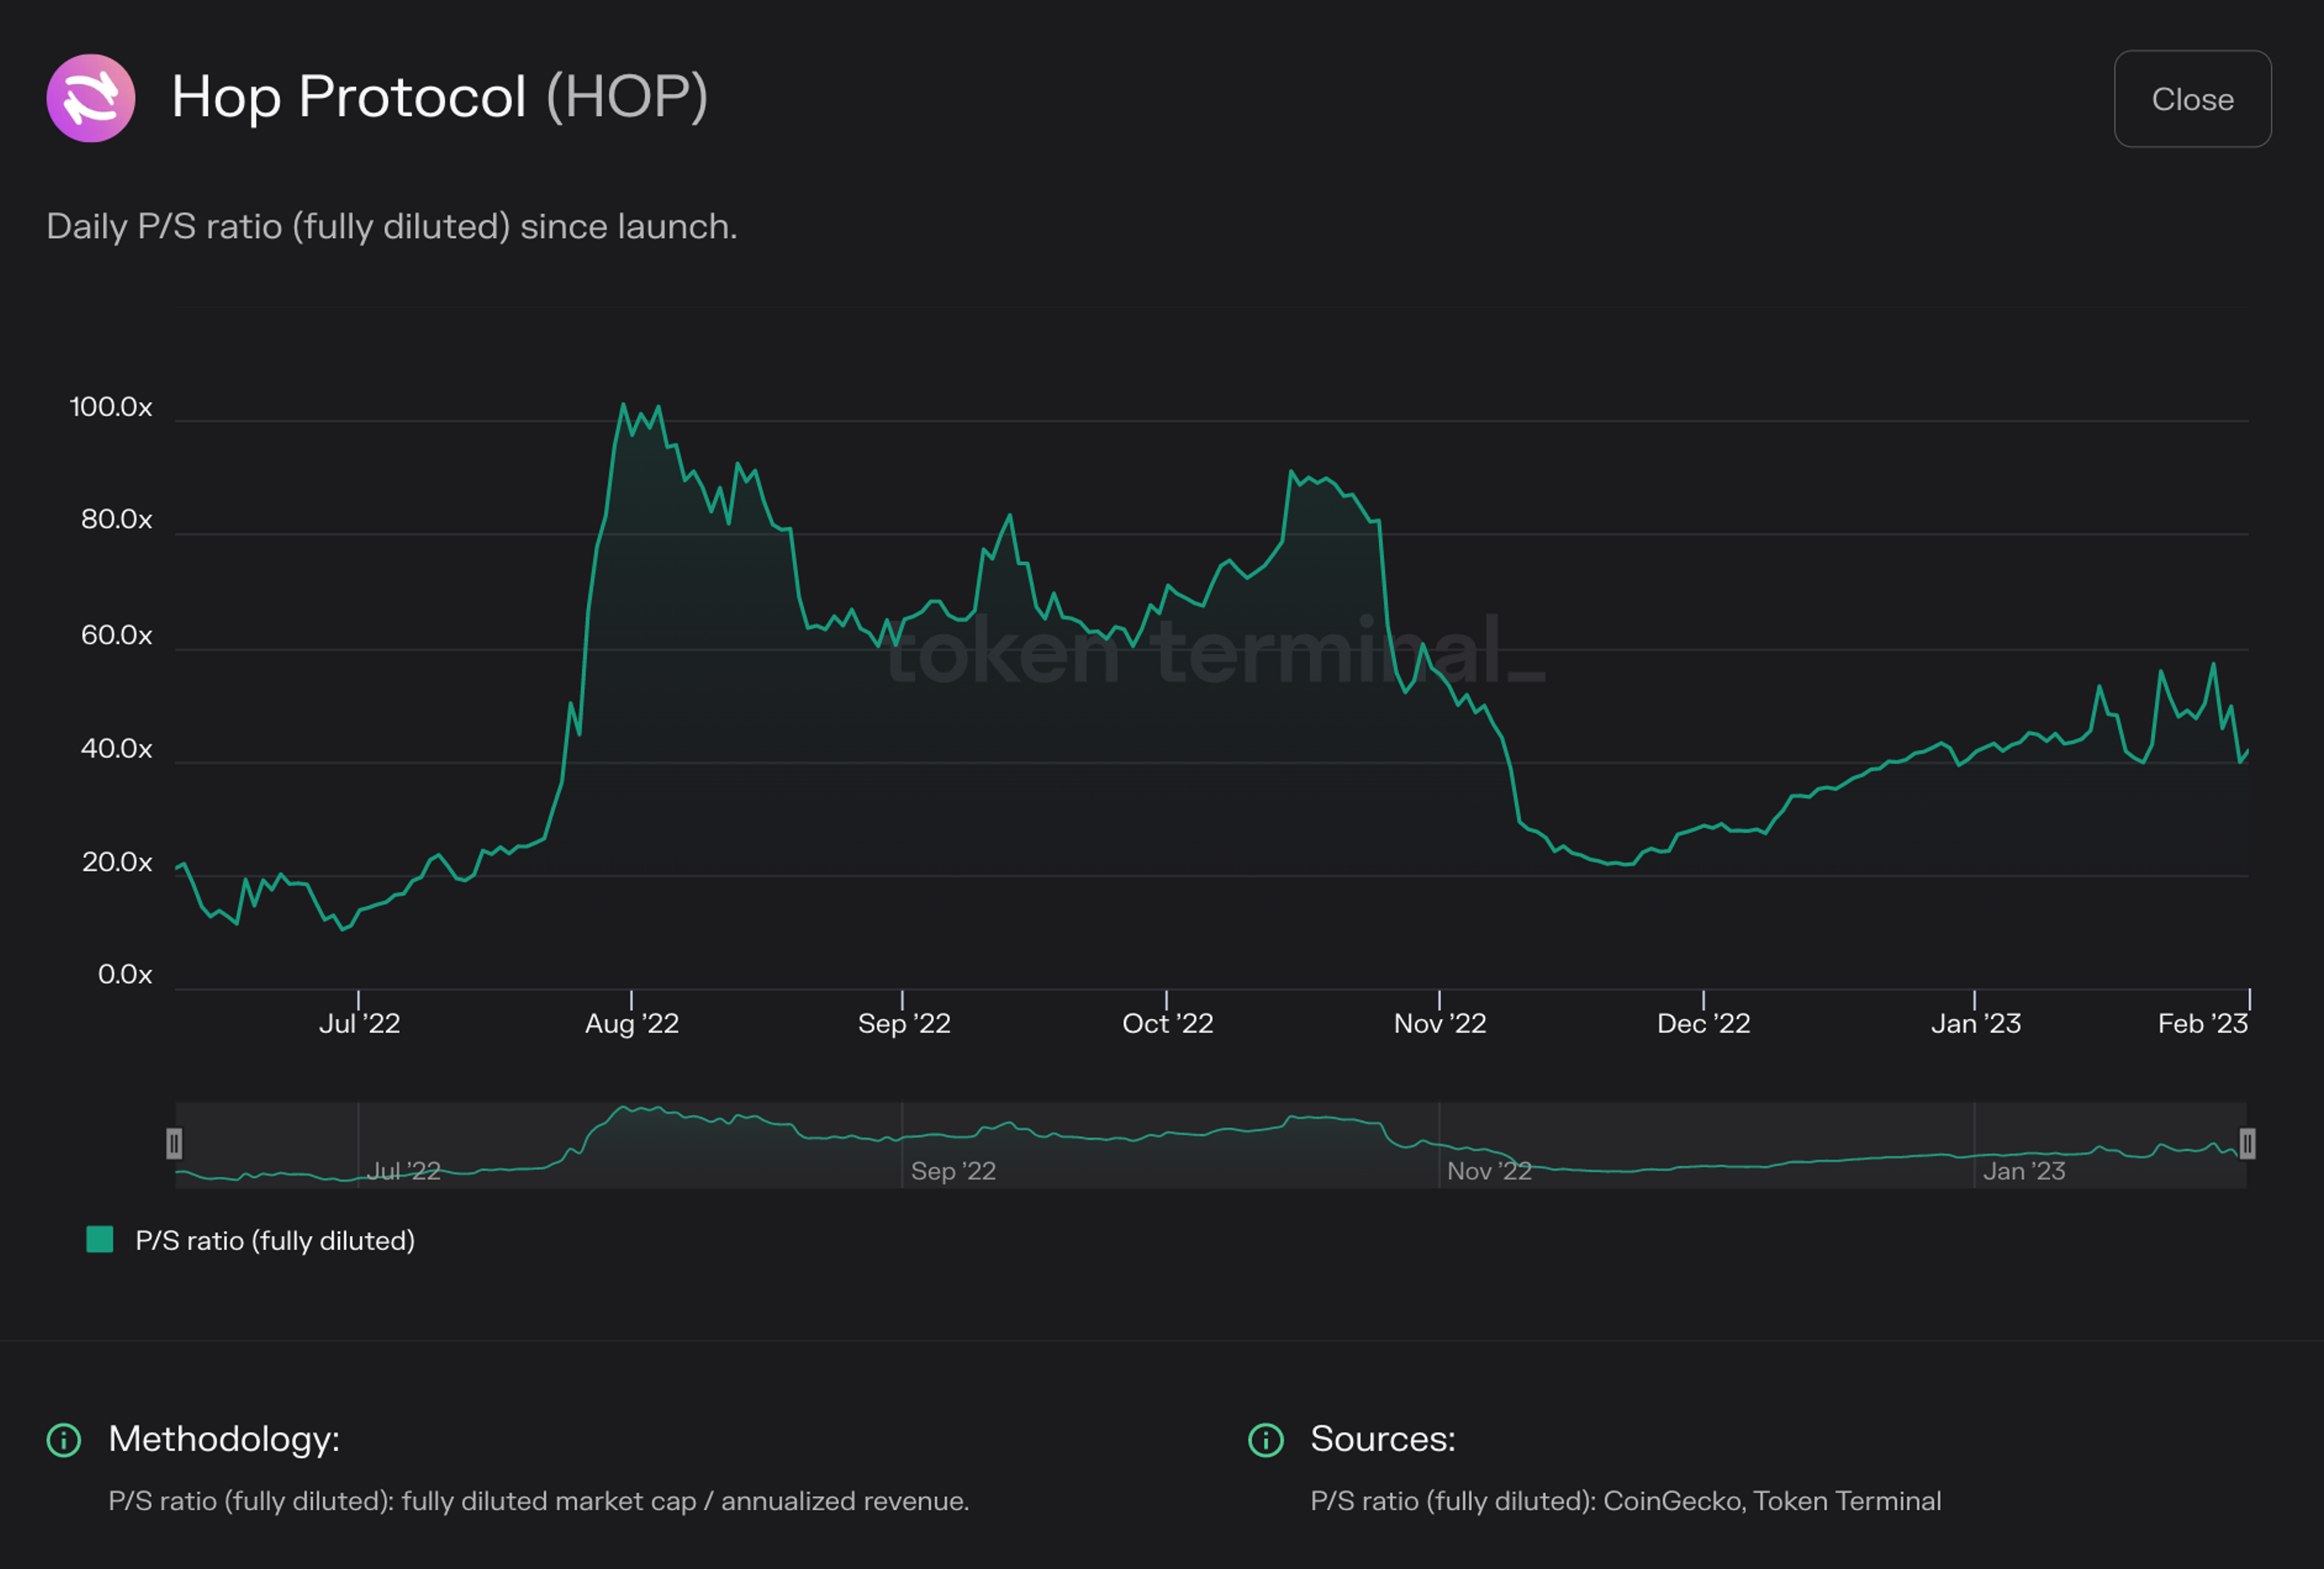 Chart of Hop Protocol daily P/S ratio